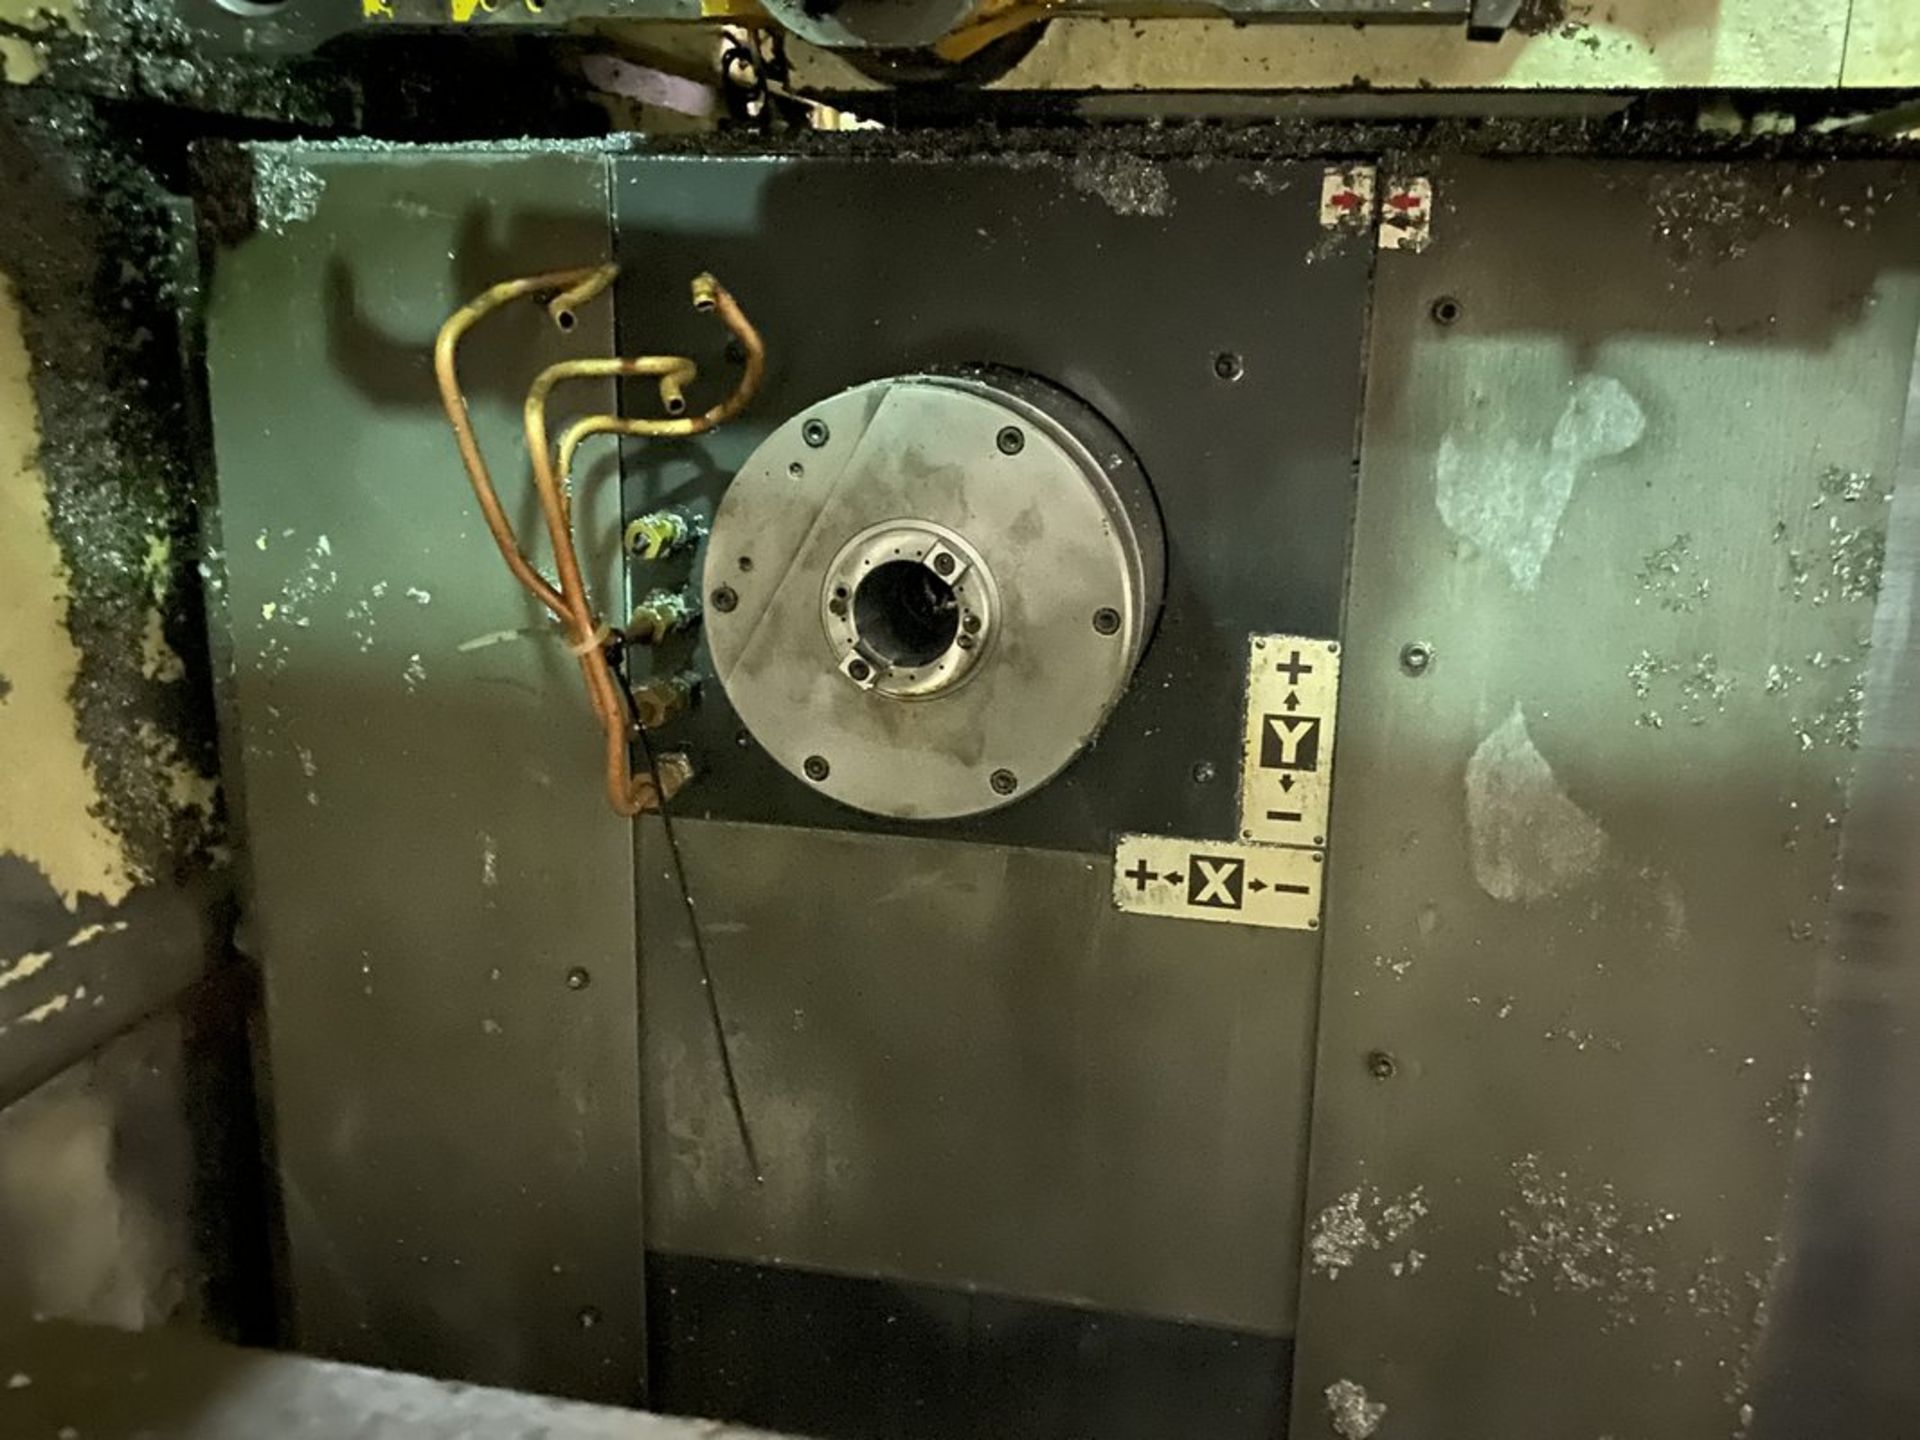 Howa MBN-US500H 4-Axis CNC Horizontal Machining Center - Image 10 of 13